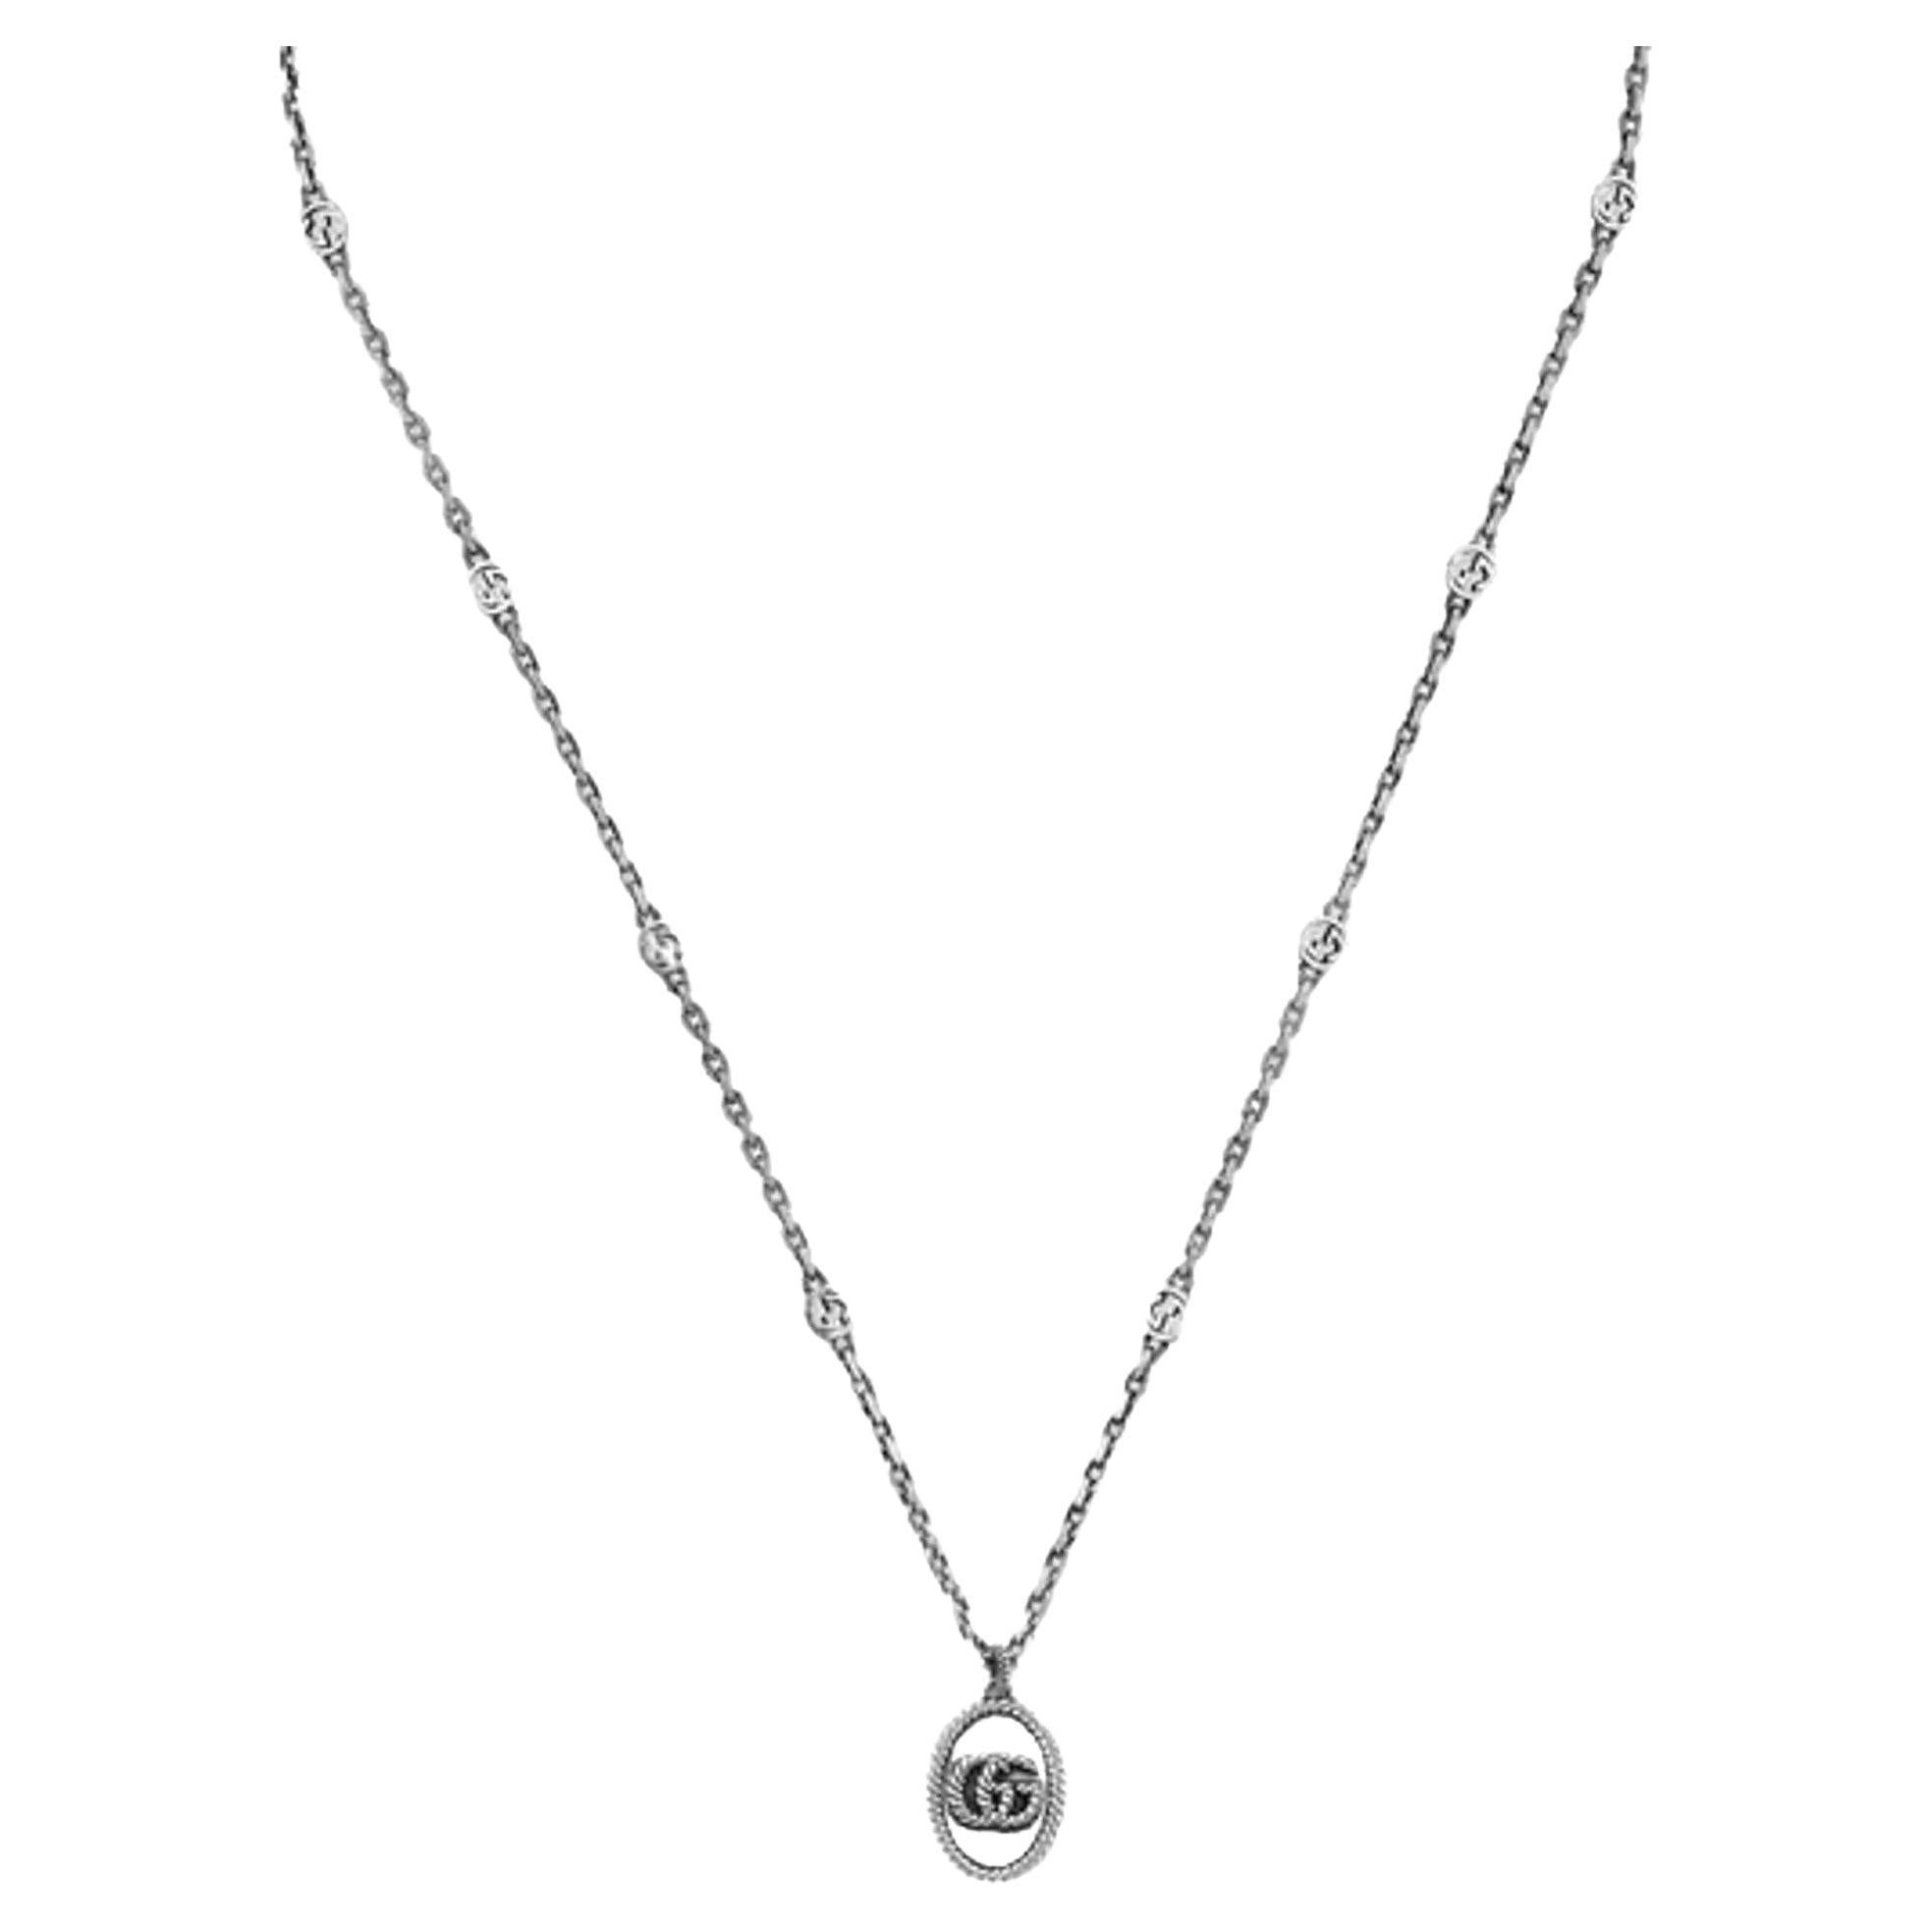 Gucci Double G Pendant Necklace 925 Sterling Silver